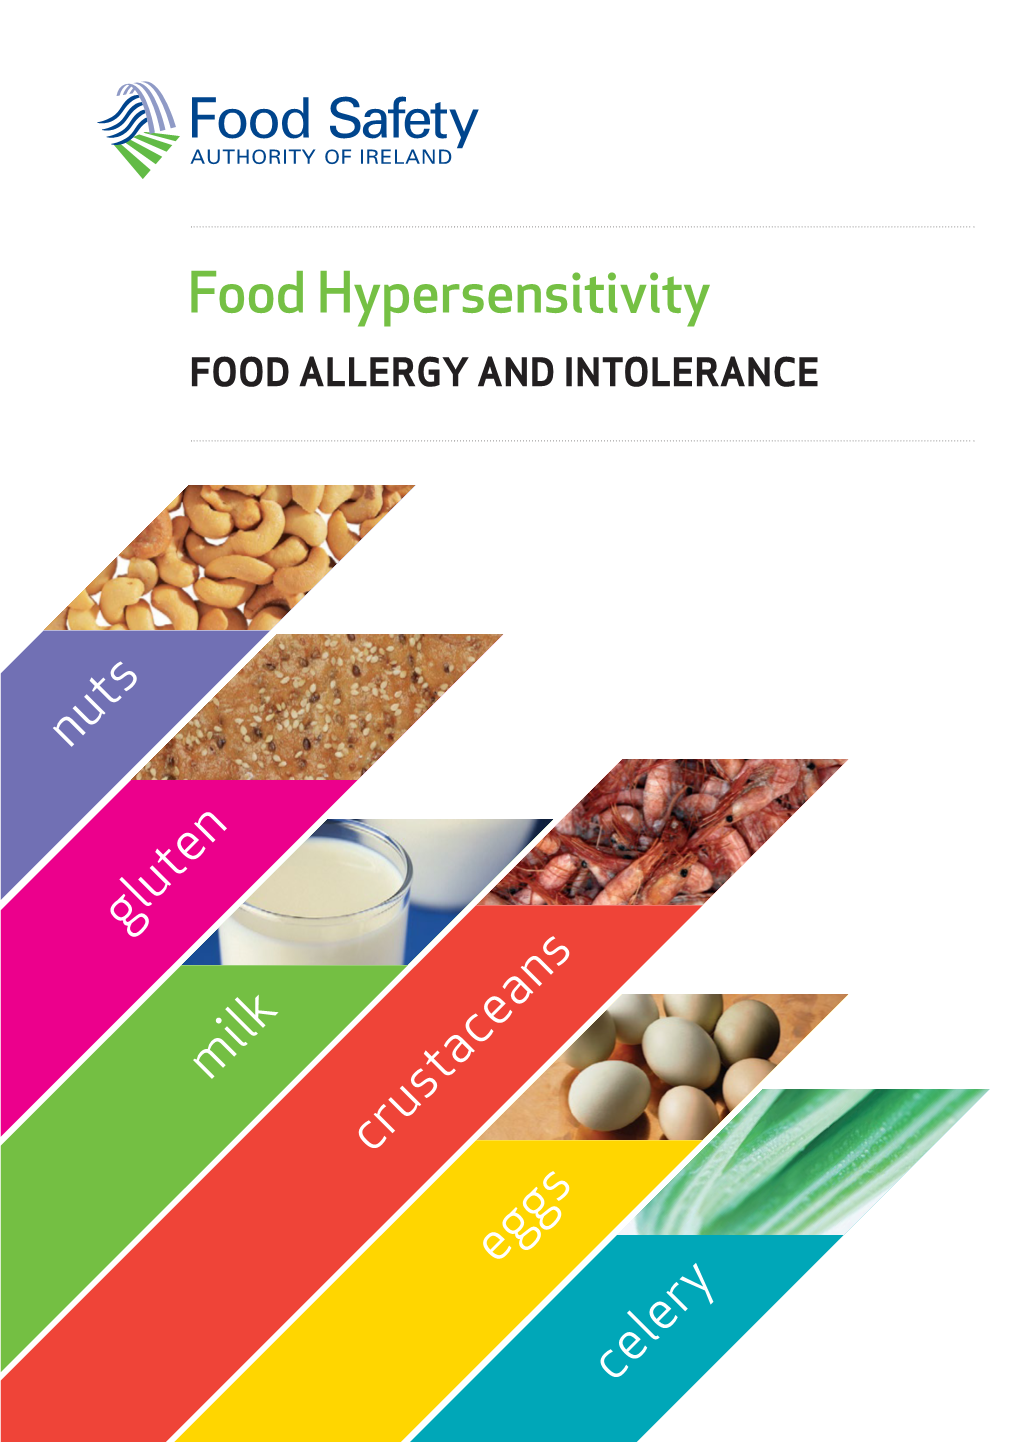 Food Hypersensitivity FOOD ALLERGY and INTOLERANCE